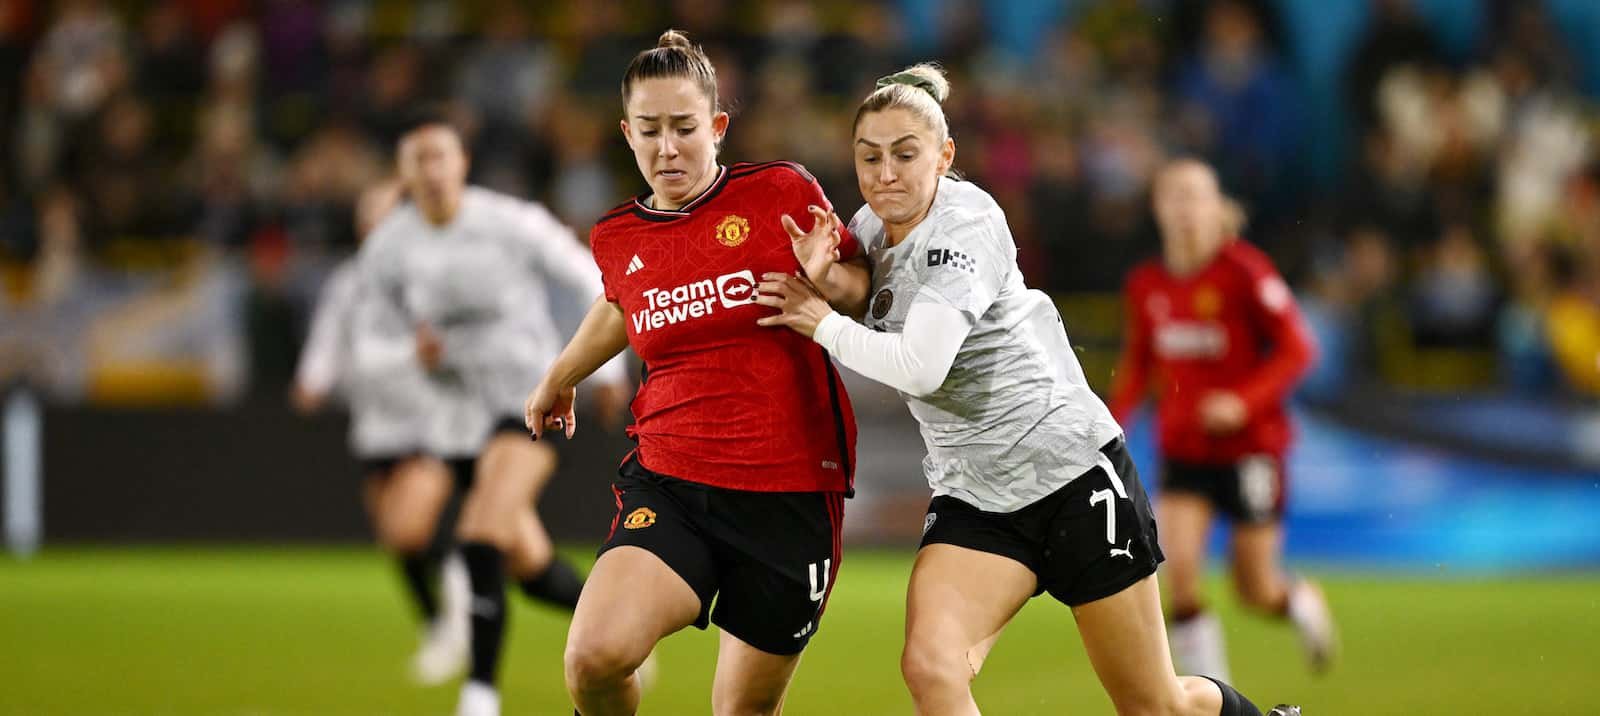 Maya Le Tissier signs four-year contract extension with Manchester United women – Man United News And Transfer News